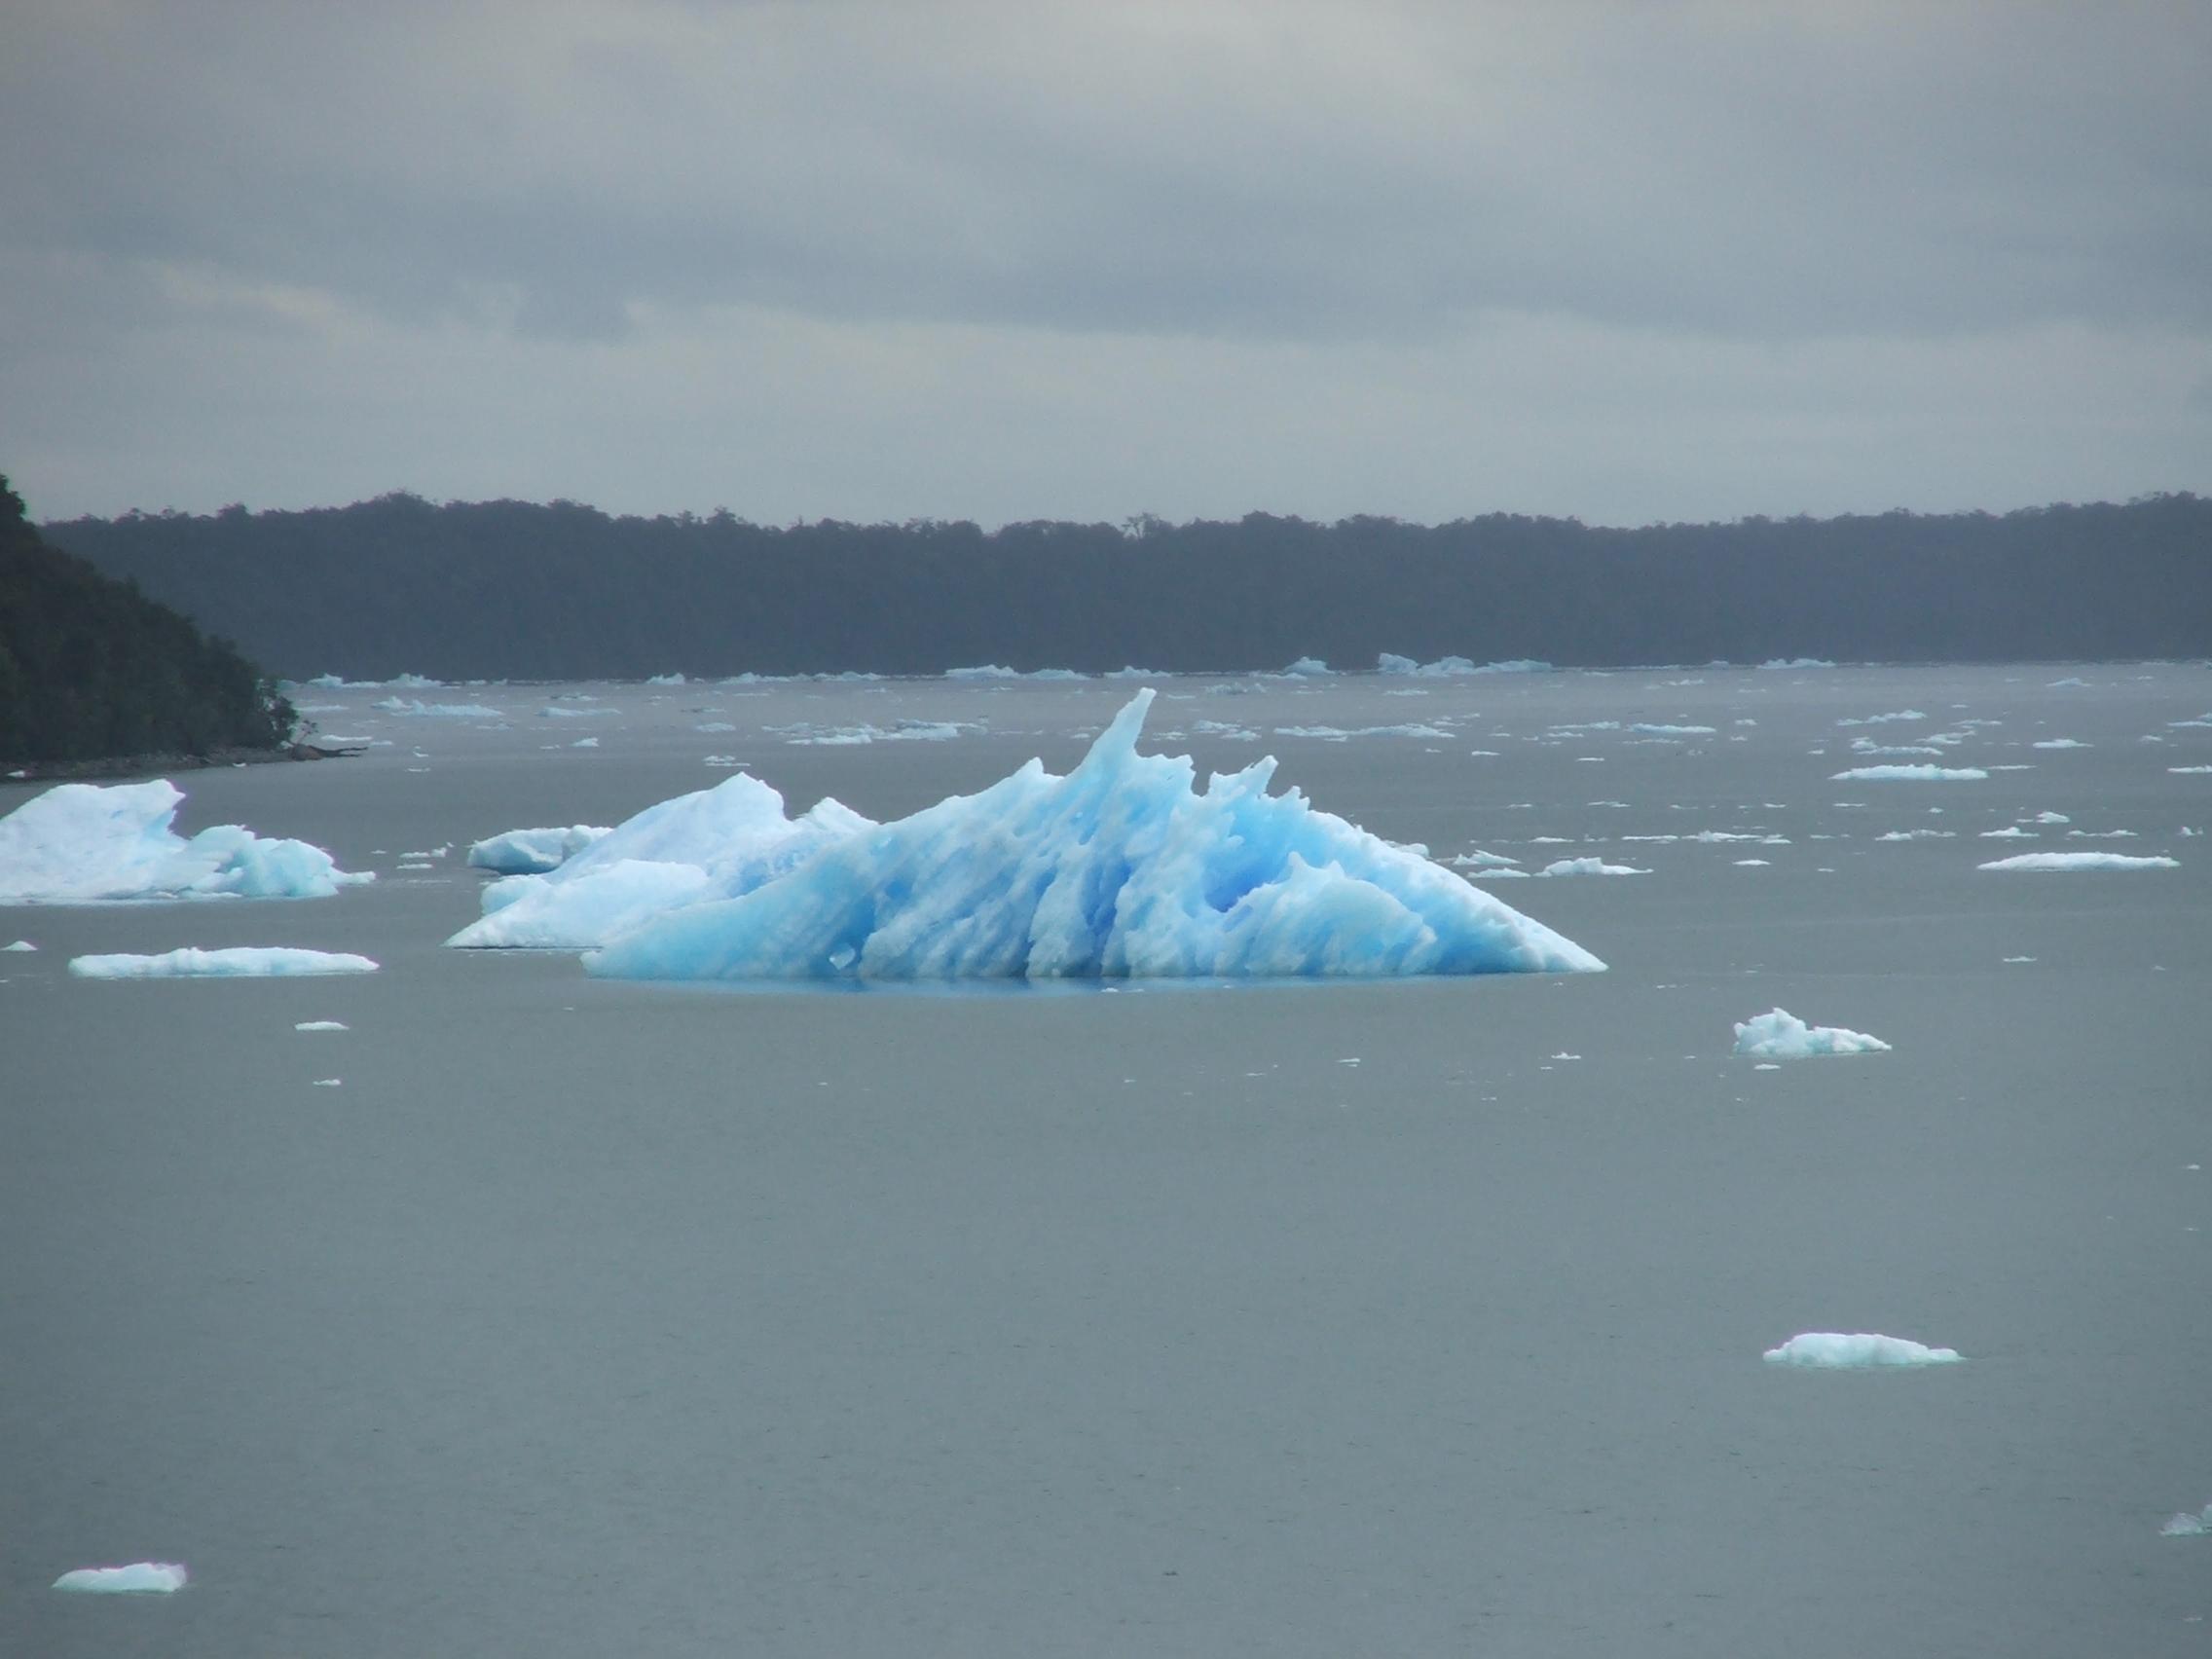 The “Iceberg Theory” of Writing | The Sarcastic Muse